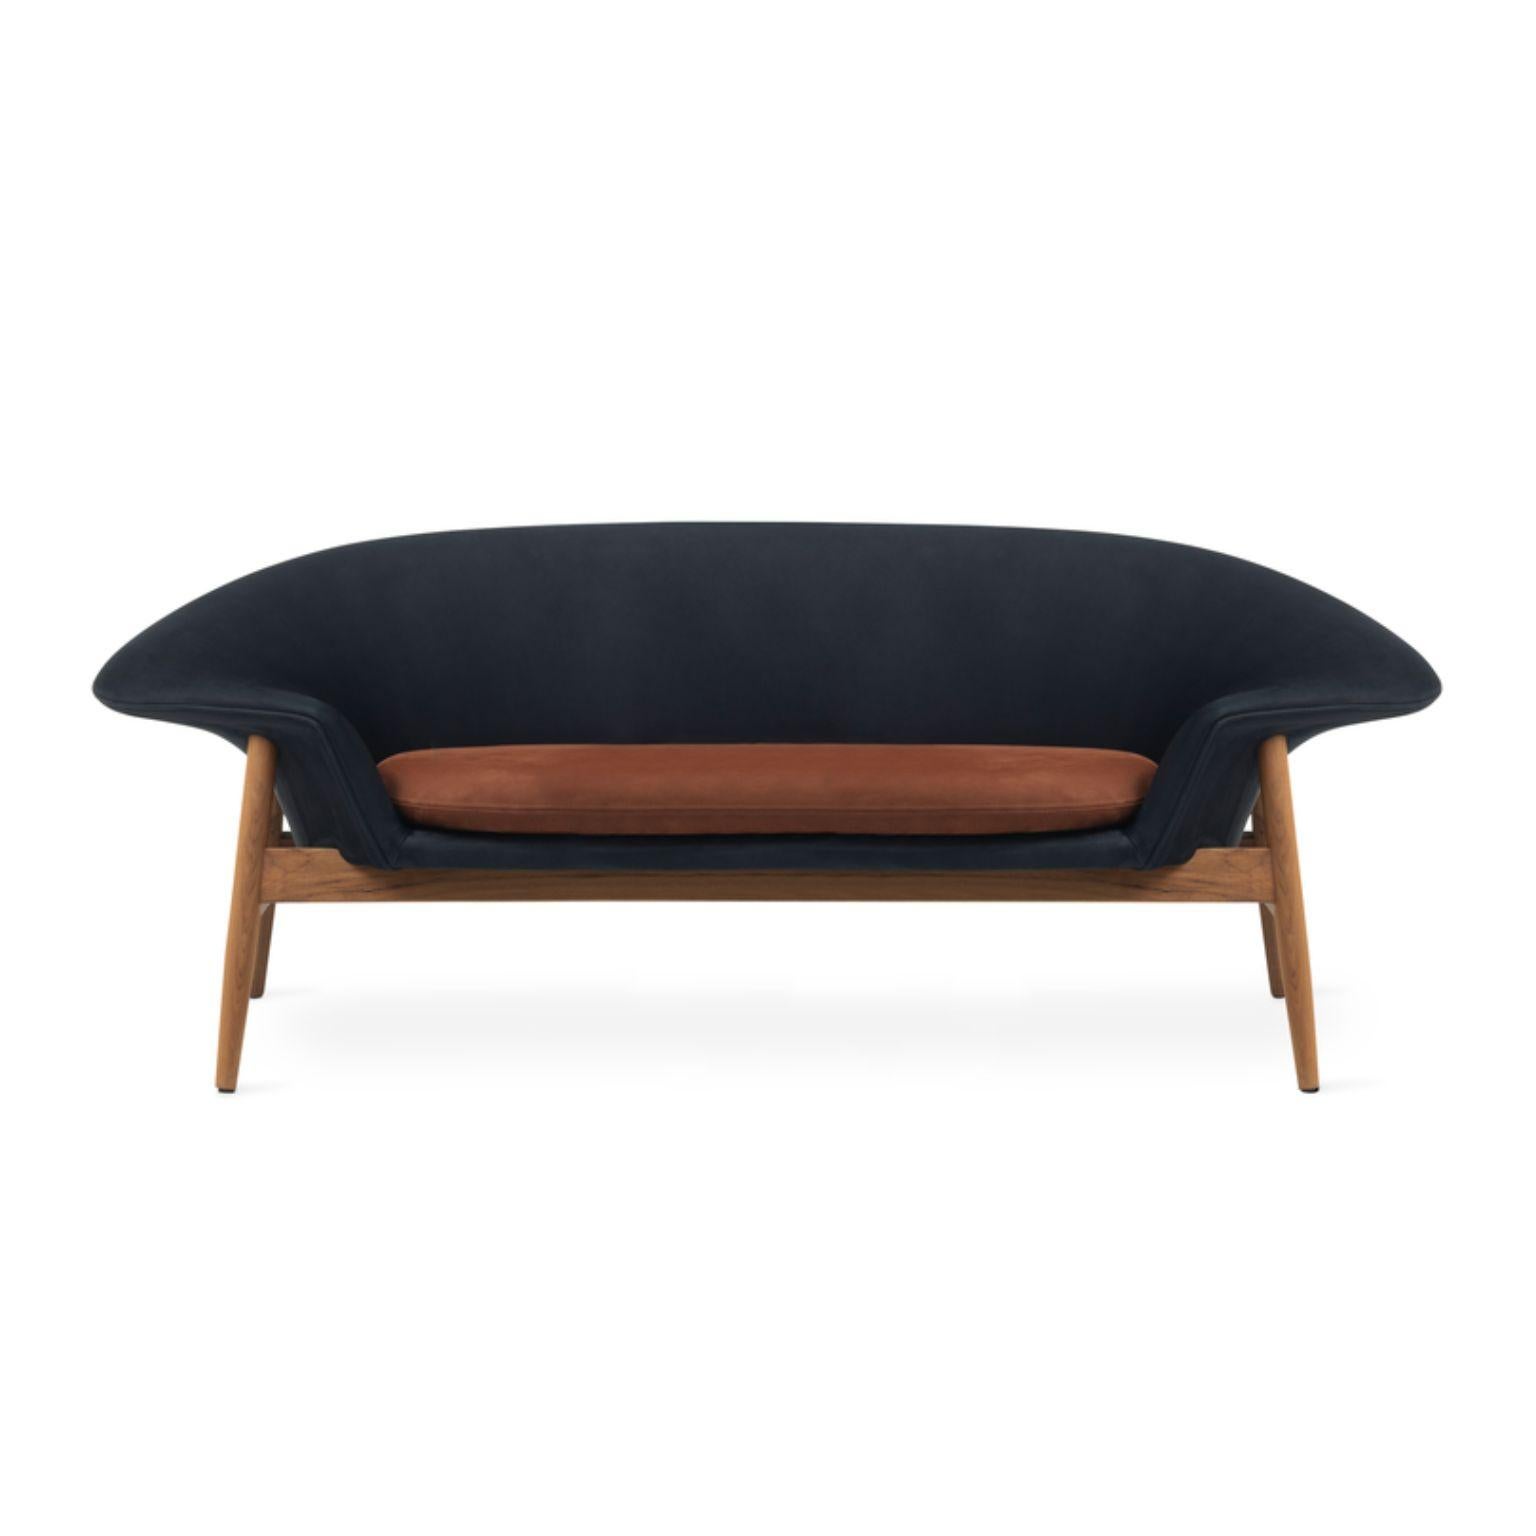 Fried egg sofa Nabuk oceano terra by Warm Nordic
Dimensions: D 186 x W 68 x H 68 cm
Material: Textile upholstery, Solid oiled teak
Weight: 42 kg
Also available in different colours and finishes.

Warm Nordic is an ambitious design brand